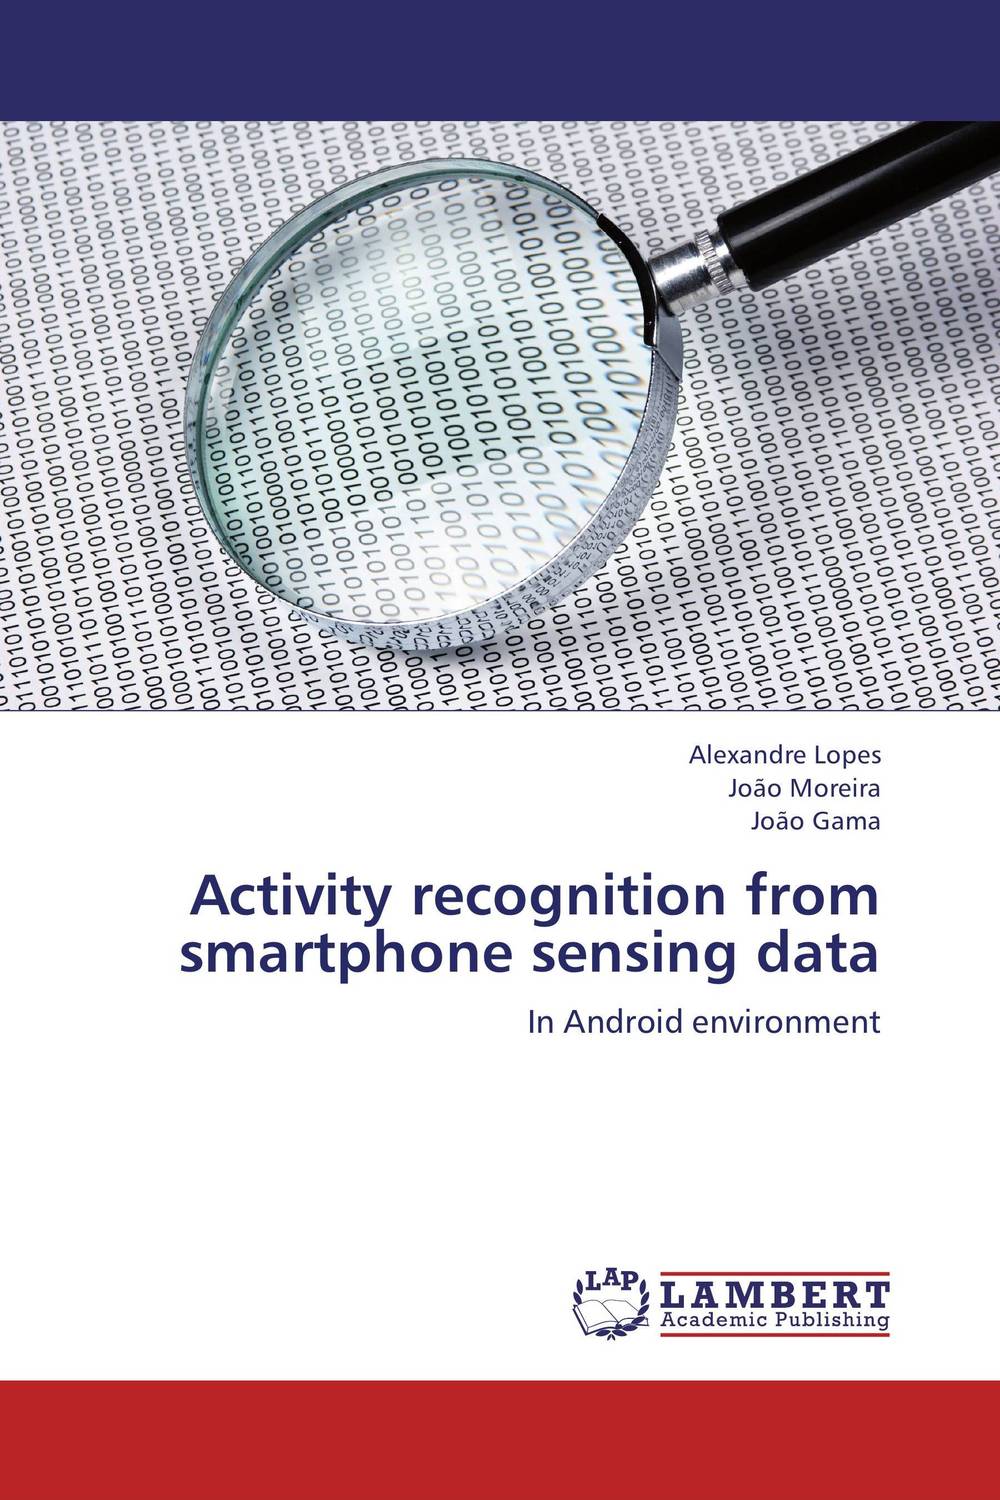 Activity recognition from smartphone sensing data